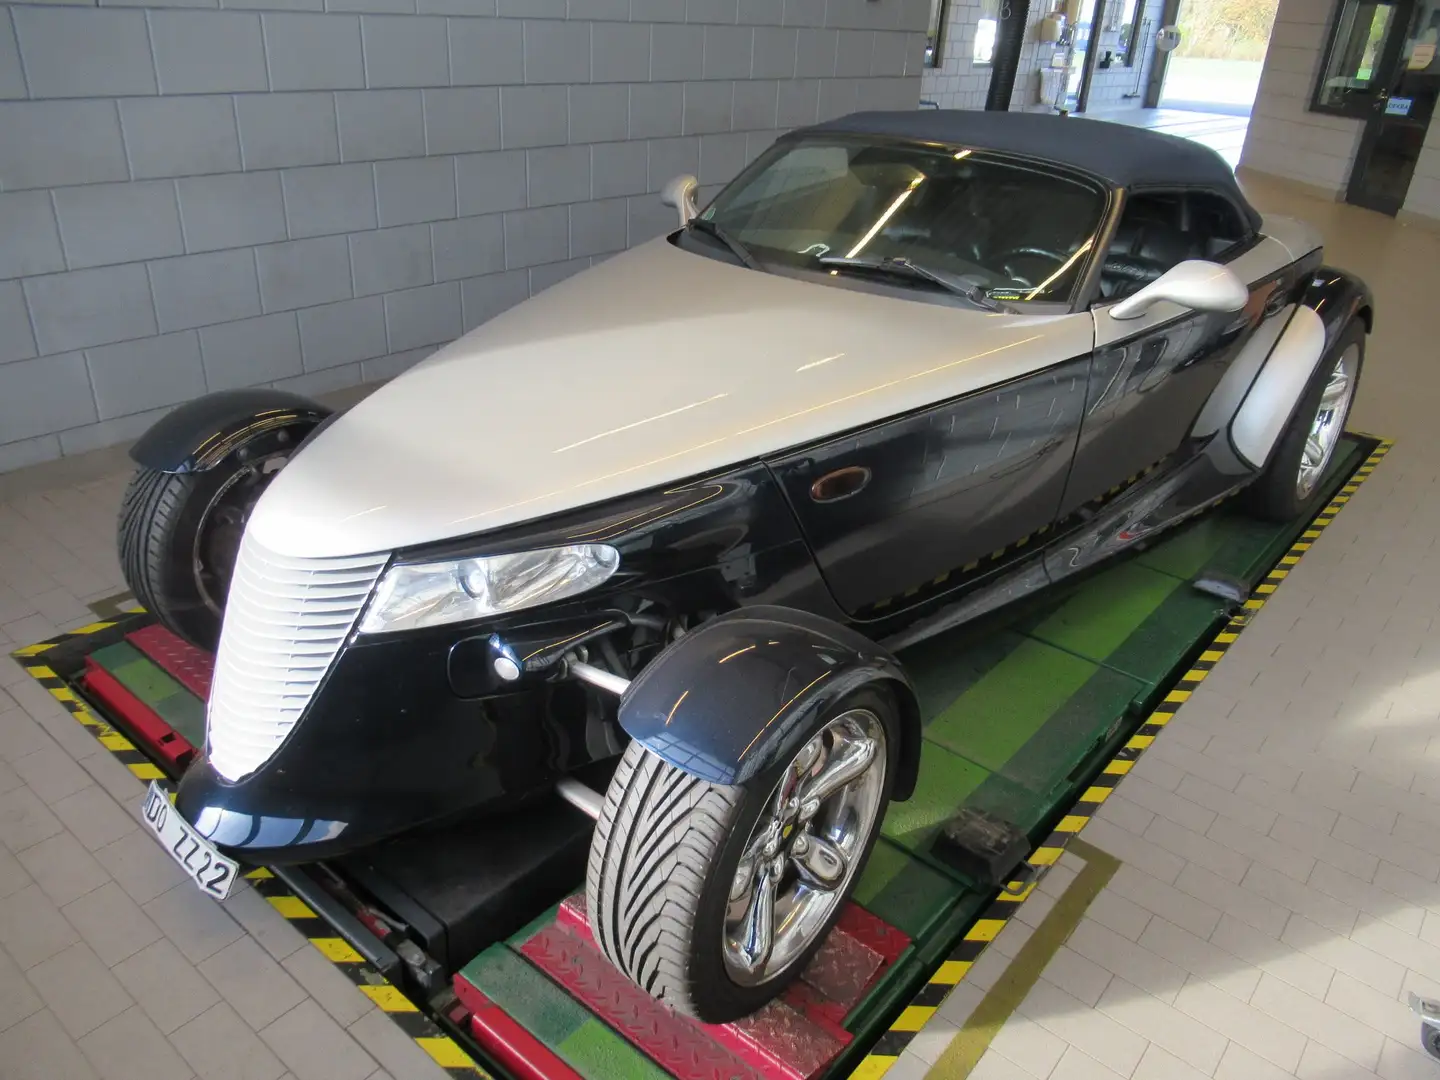 Plymouth Prowler # # # Cool Car for Crazy People # # # Mavi - 2